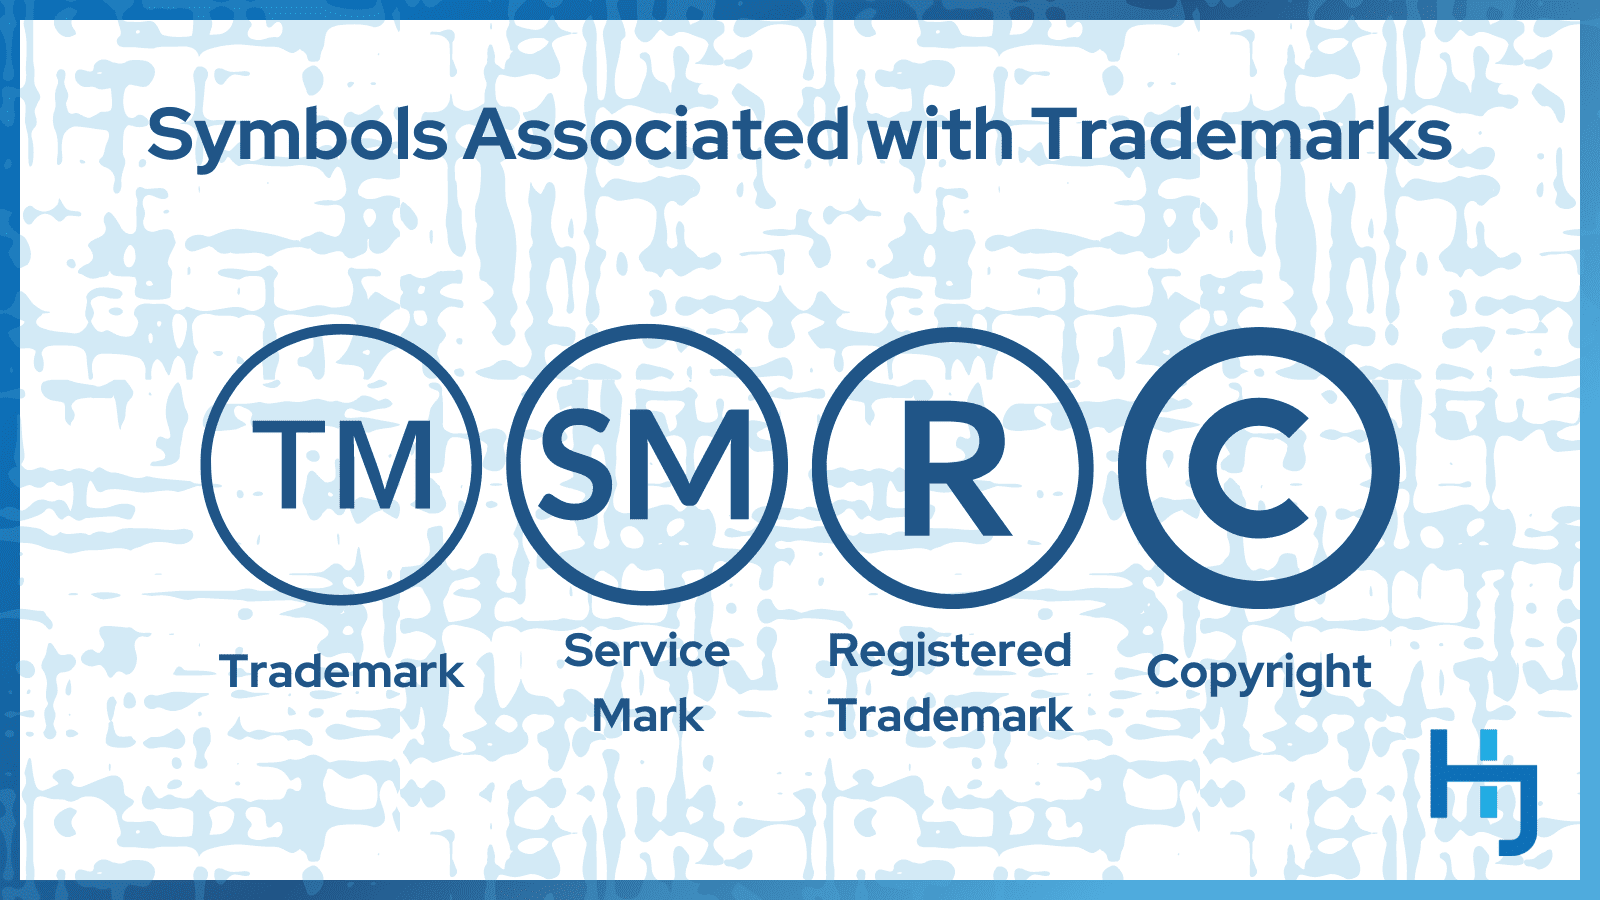 Symbols Associated with Trademarks